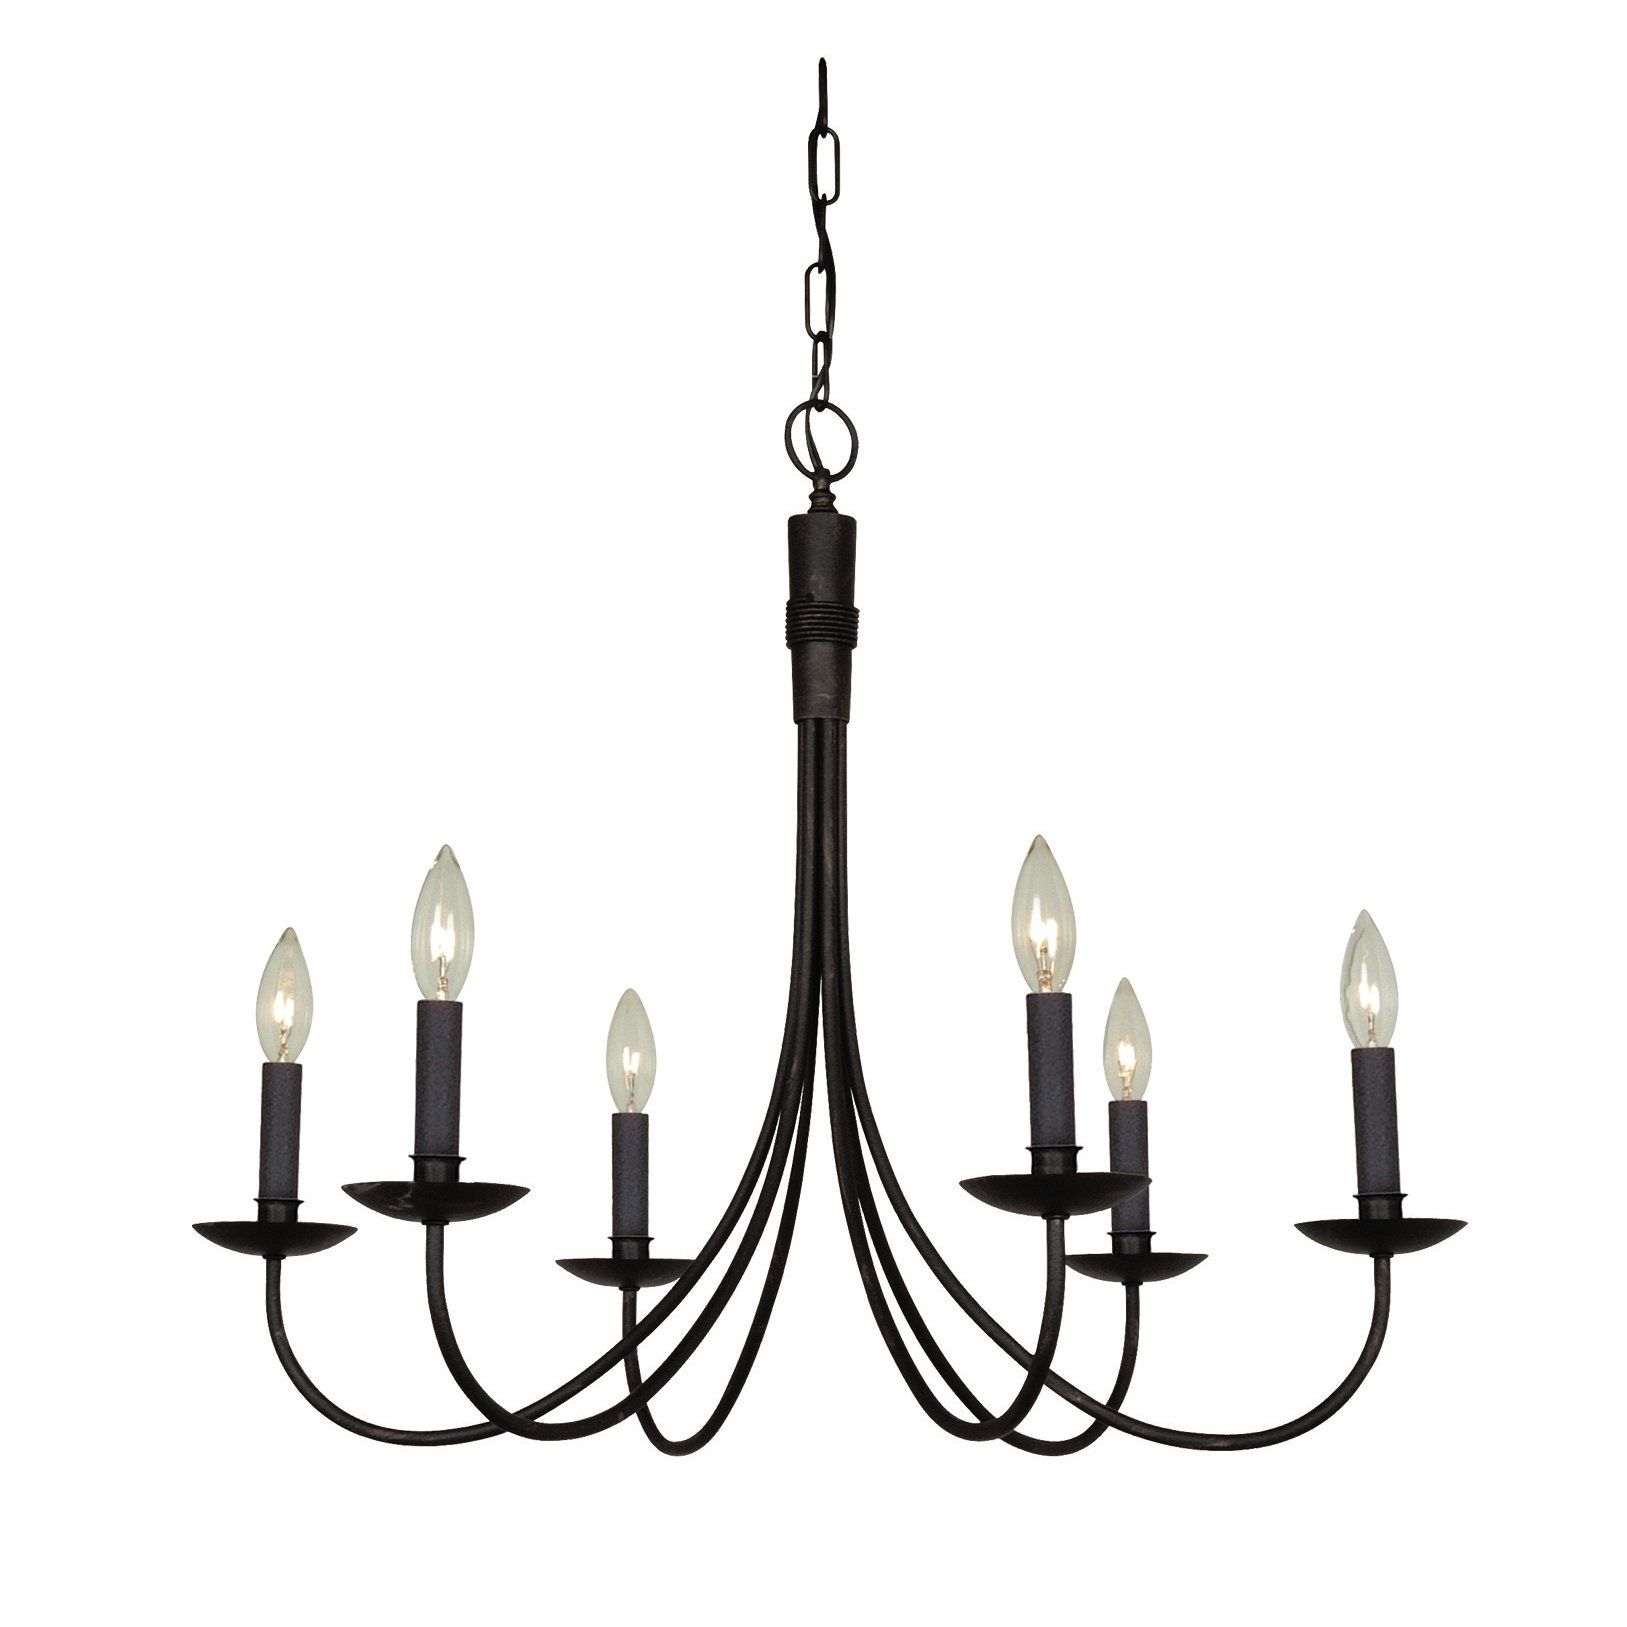 Dar Home Co Gavin 6 Light Candle Style Chandelier Reviews Intended For Candle Light Chandelier (View 2 of 12)